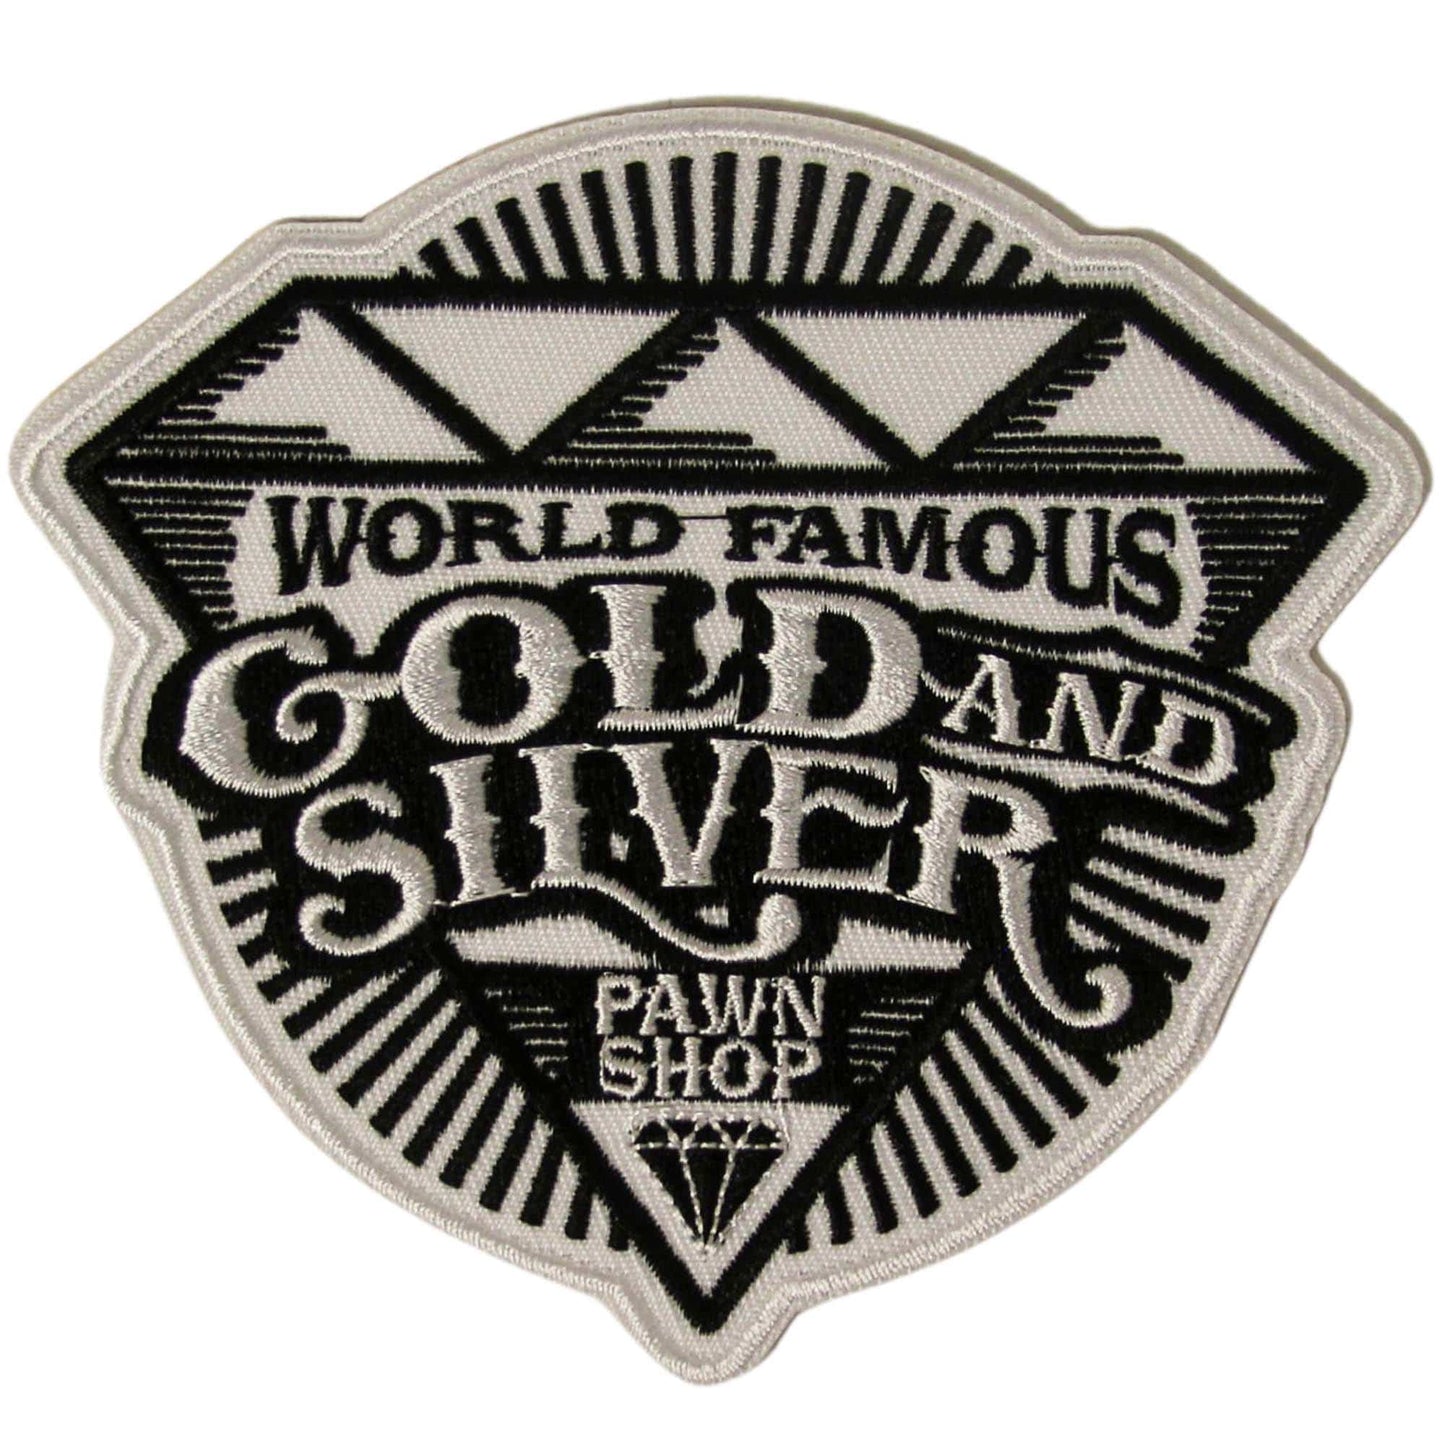 The World Famous Gold & Silver Pawn Shop Patches Diamond